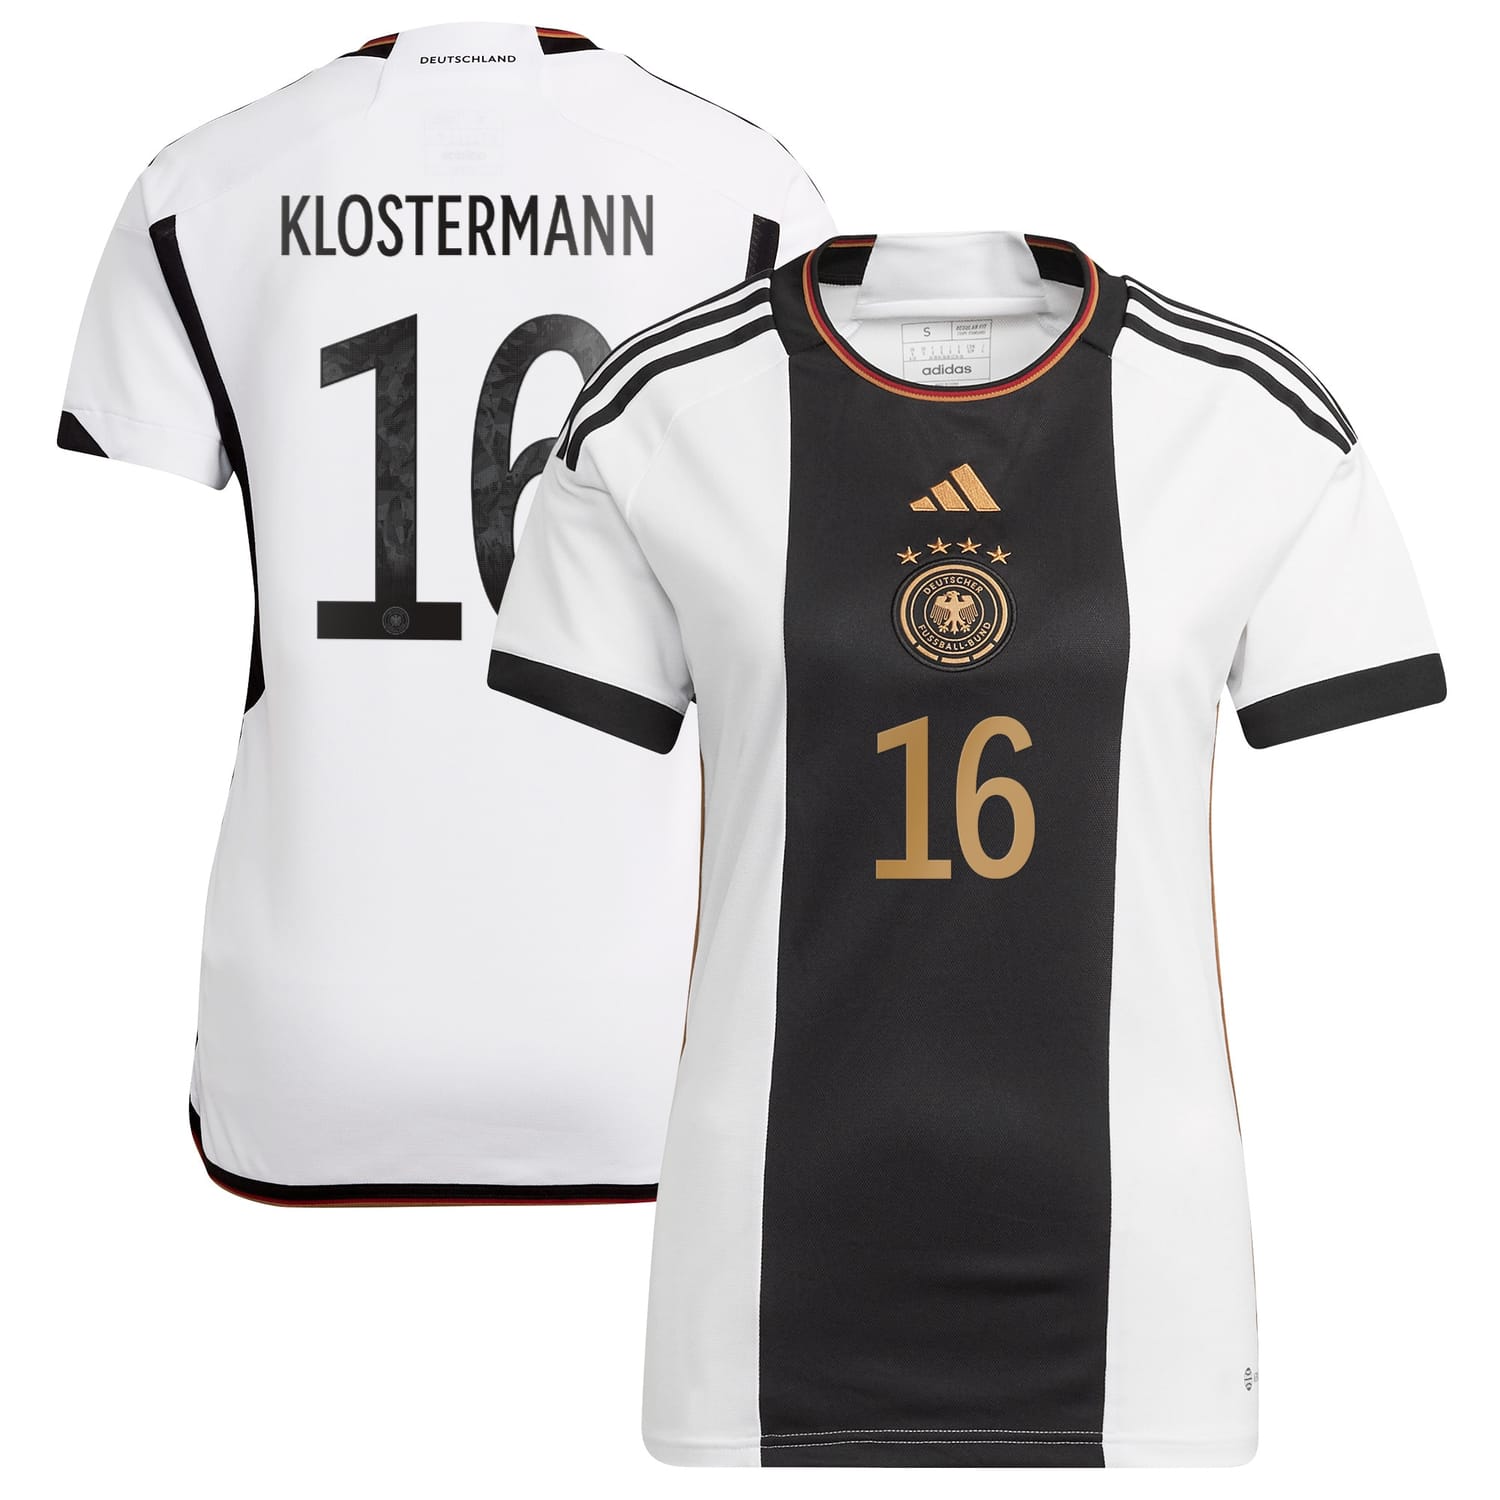 Germany National Team Home Jersey Shirt player Lukas Klostermann 16 printing for Women